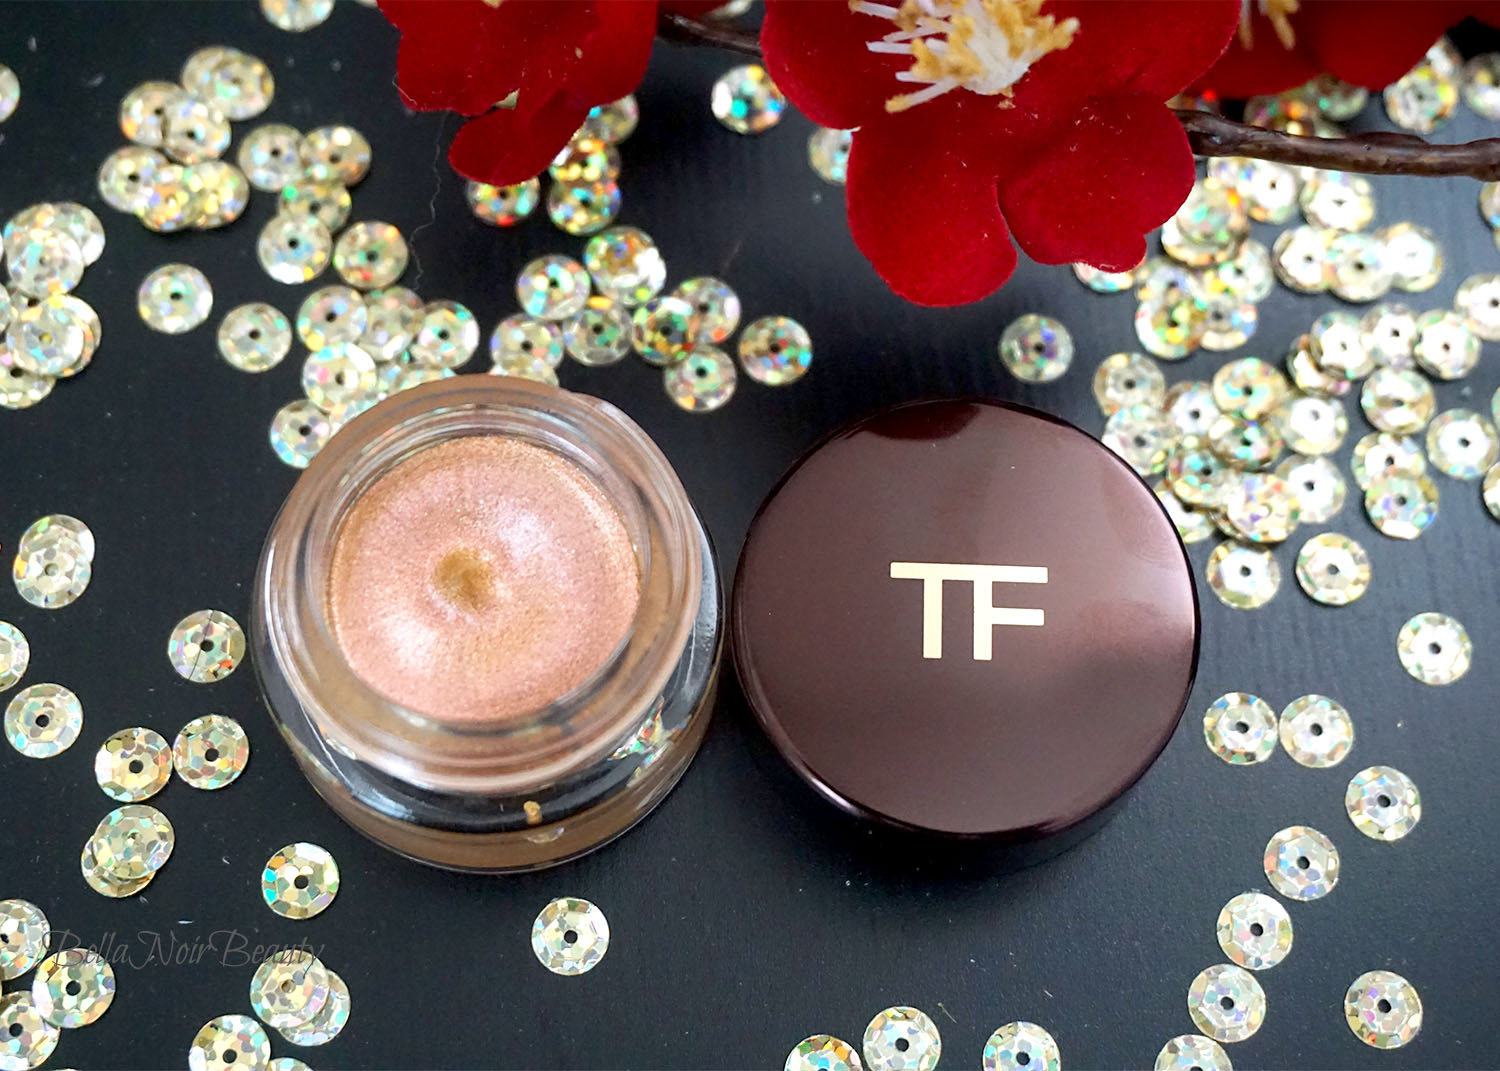 Tom Ford Cream Color For Eyes in Sphinx Gives Me All Kinds of Feels! |  BELLA NOIR BEAUTY